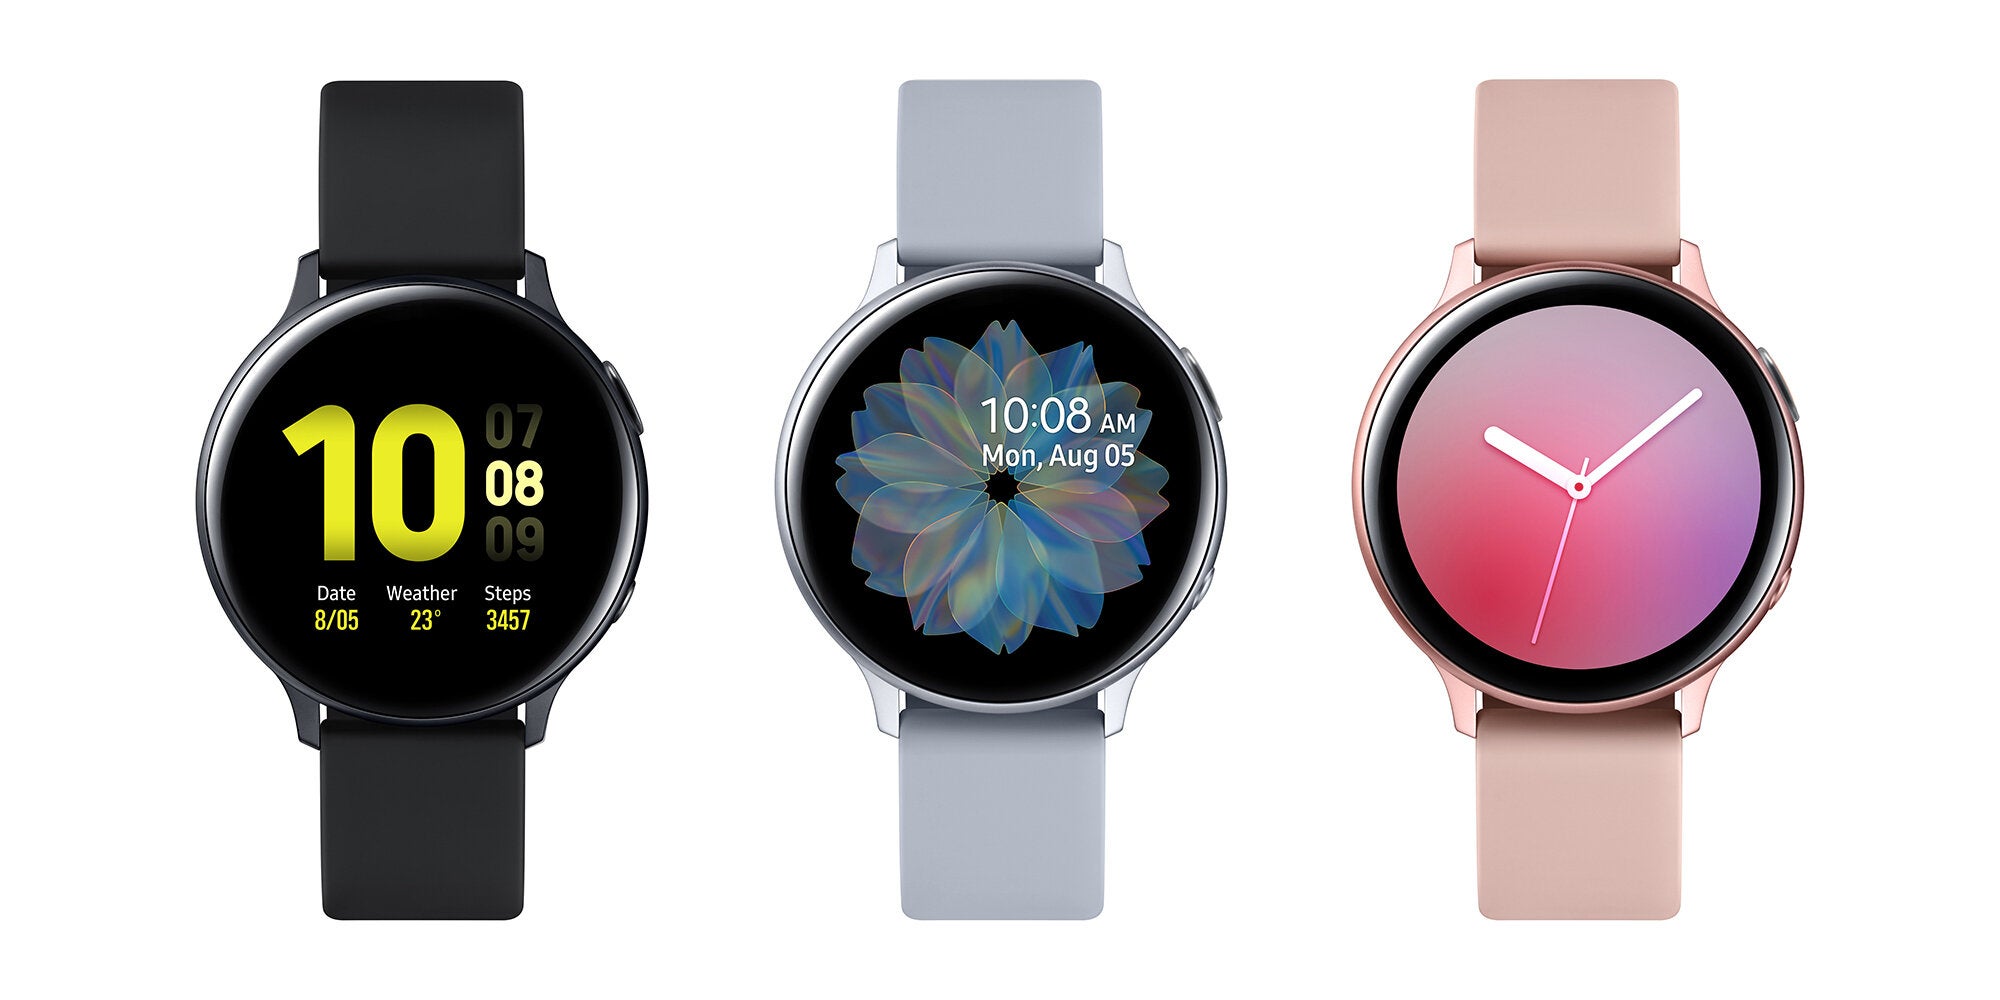 Samsung Galaxy Watch Active 2 and Galaxy Tab S6 coming soon to T-Mobile